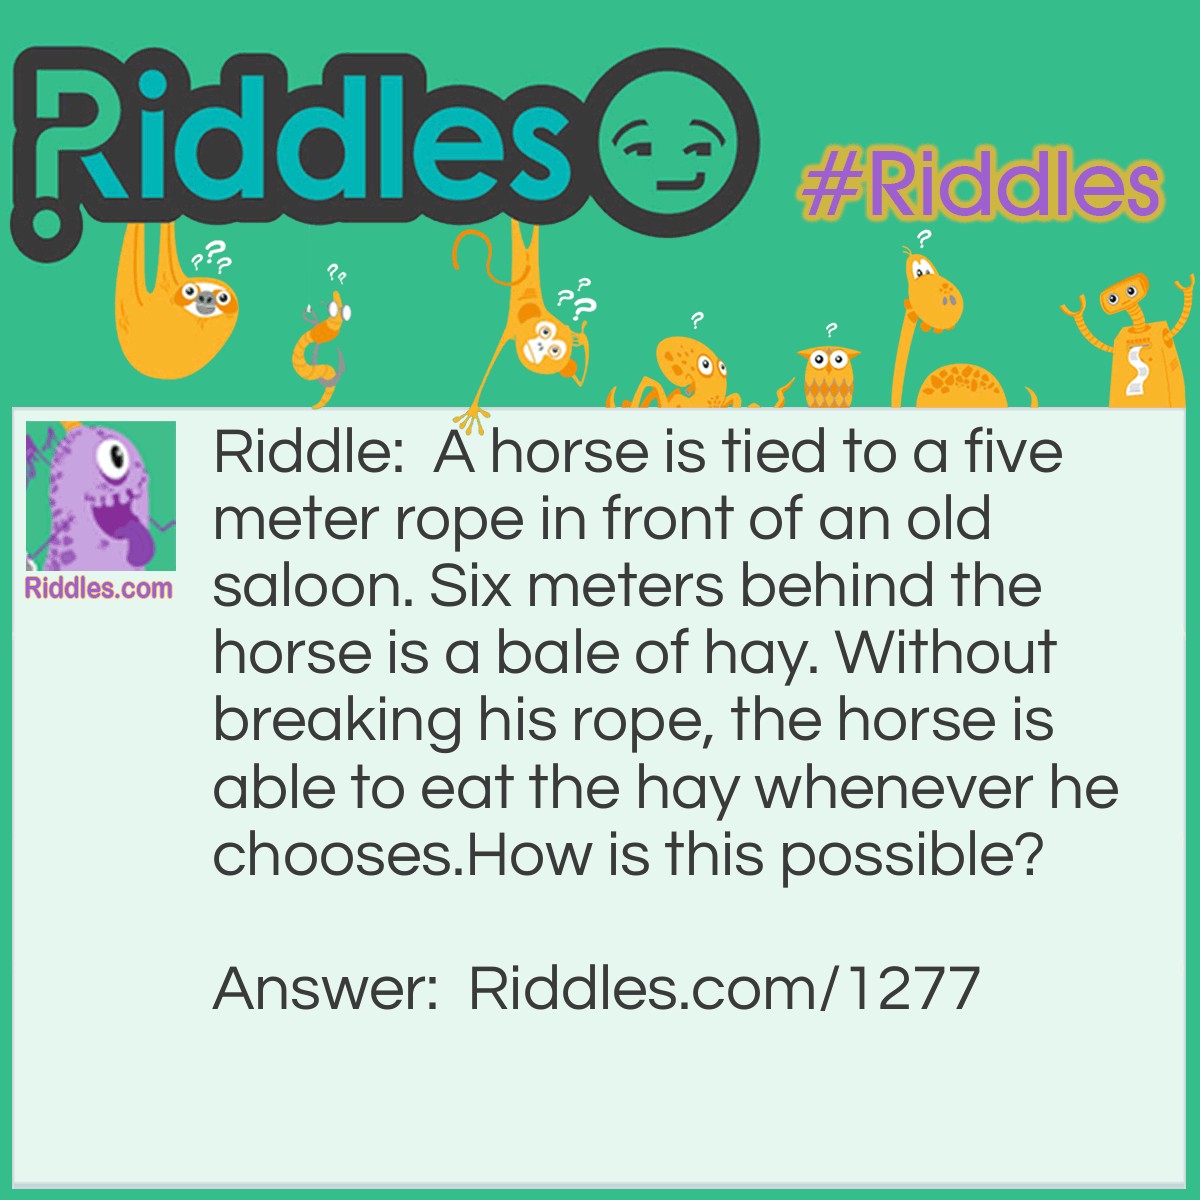 Riddle: A horse is tied to a five meter rope in front of an old saloon. Six meters behind the horse is a bale of hay. Without breaking his rope, the horse is able to eat the hay whenever he chooses.
How is this possible? Answer: The rope is not tied to anything else.